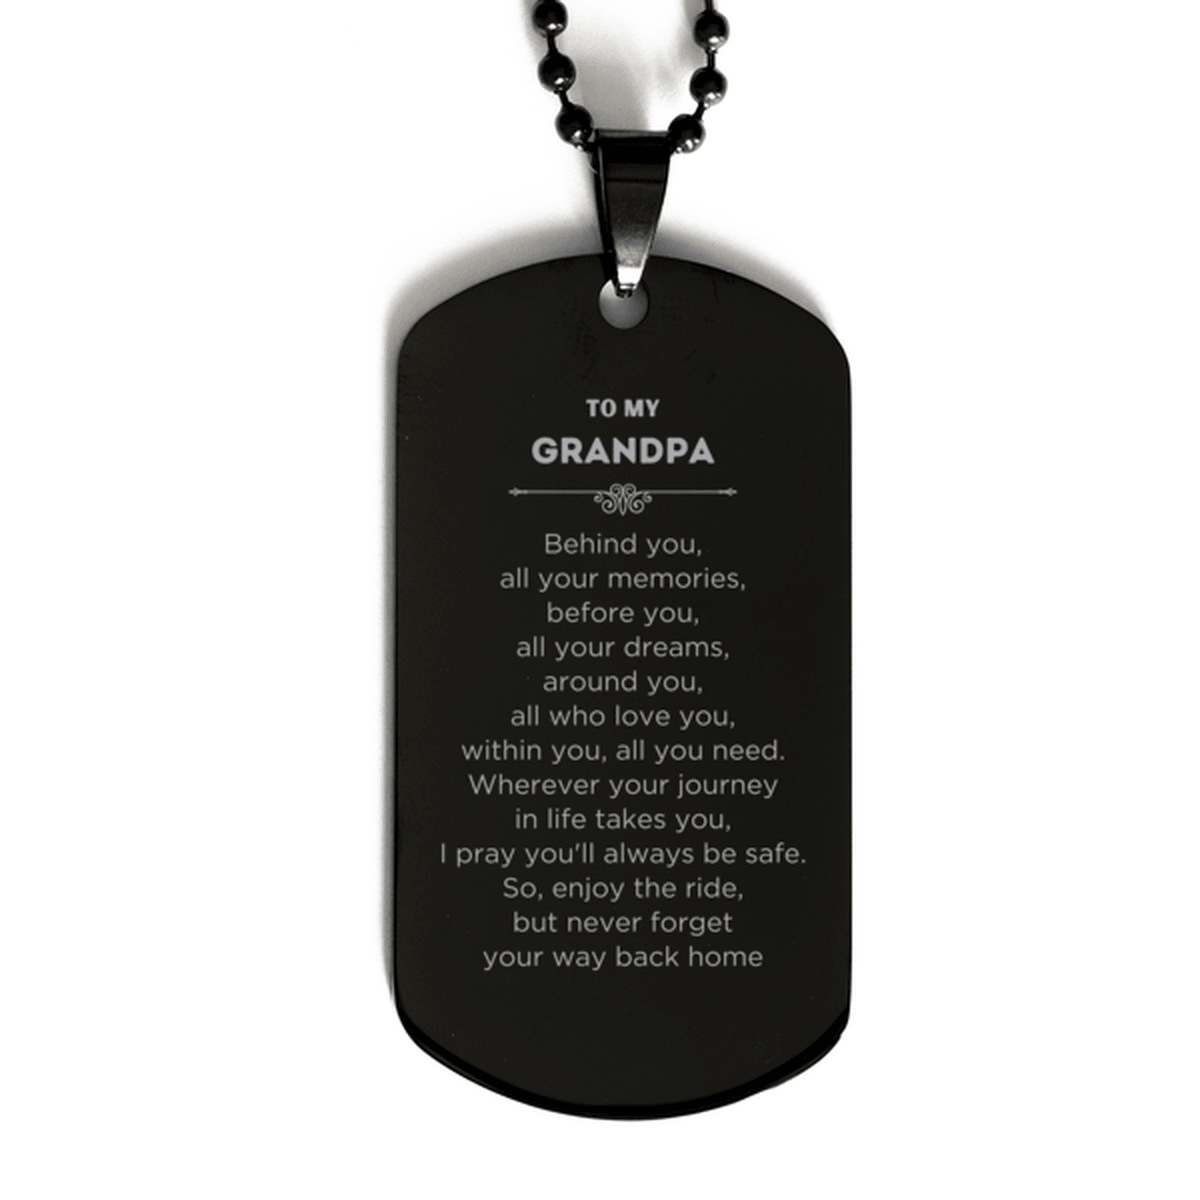 Grandpa Black Dog Tag Necklace Bracelet Birthday Christmas Unique Gifts Behind you, all your memories, before you, all your dreams - Mallard Moon Gift Shop